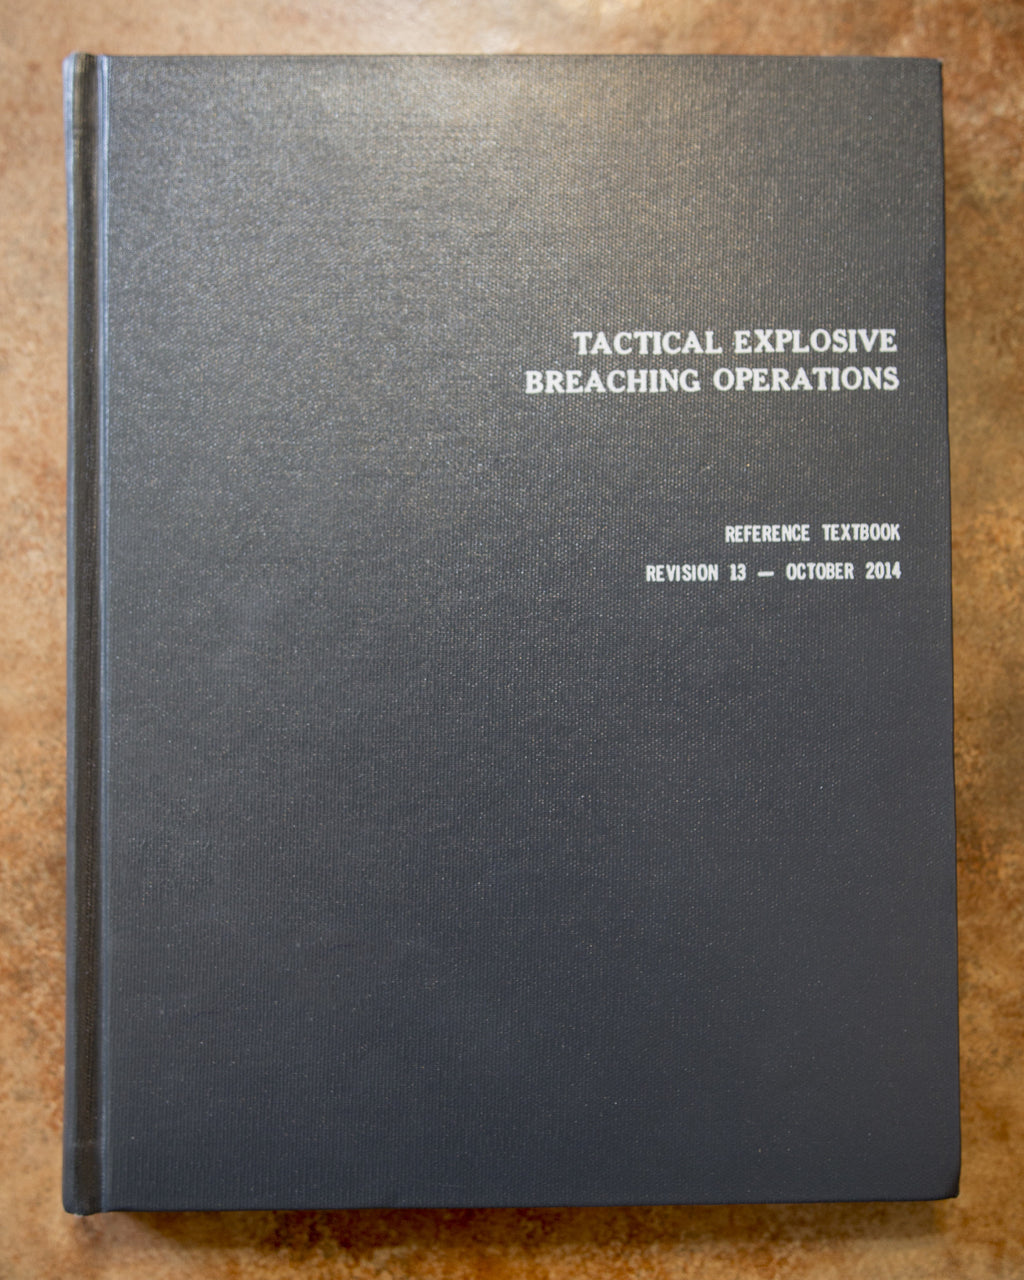 Tactical Explosive Breaching Operations Textbook